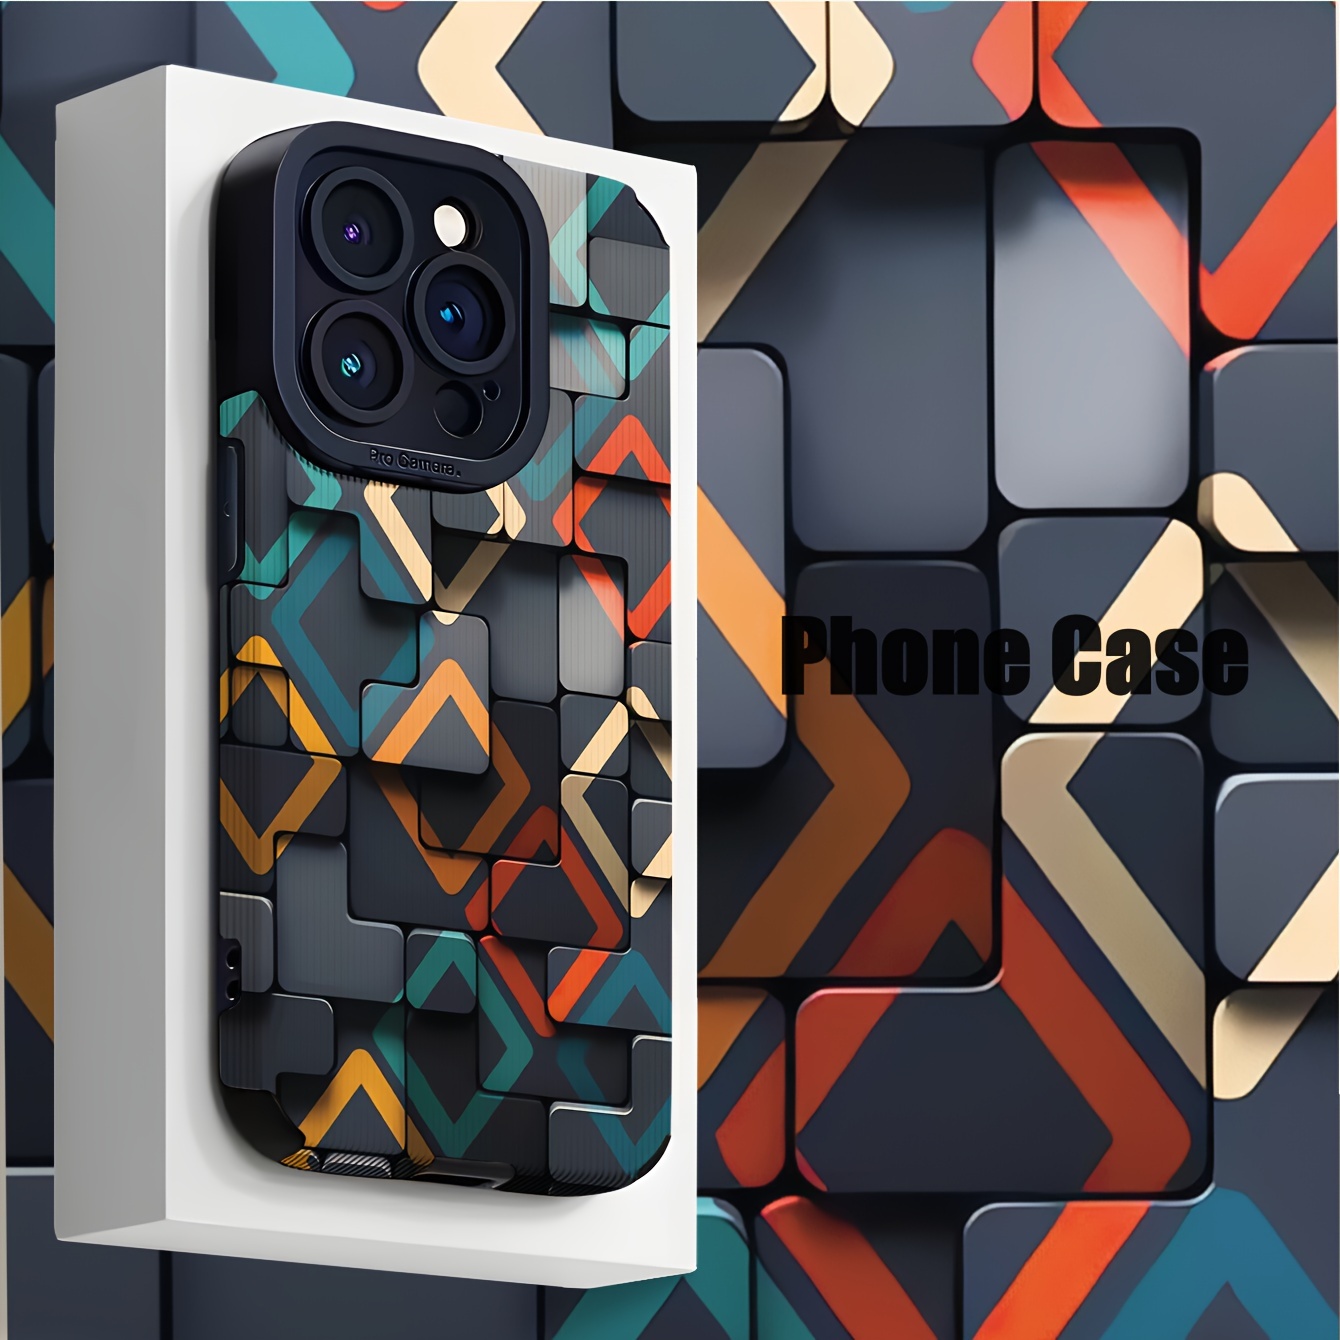 

Geometric Pattern Tpu Phone Case For Iphone 7/8/x/xs/11 Series/12 Series/13 Series/14 Series/15 Series - Durable Anti-scratch Protective Cover With Vibrant Design